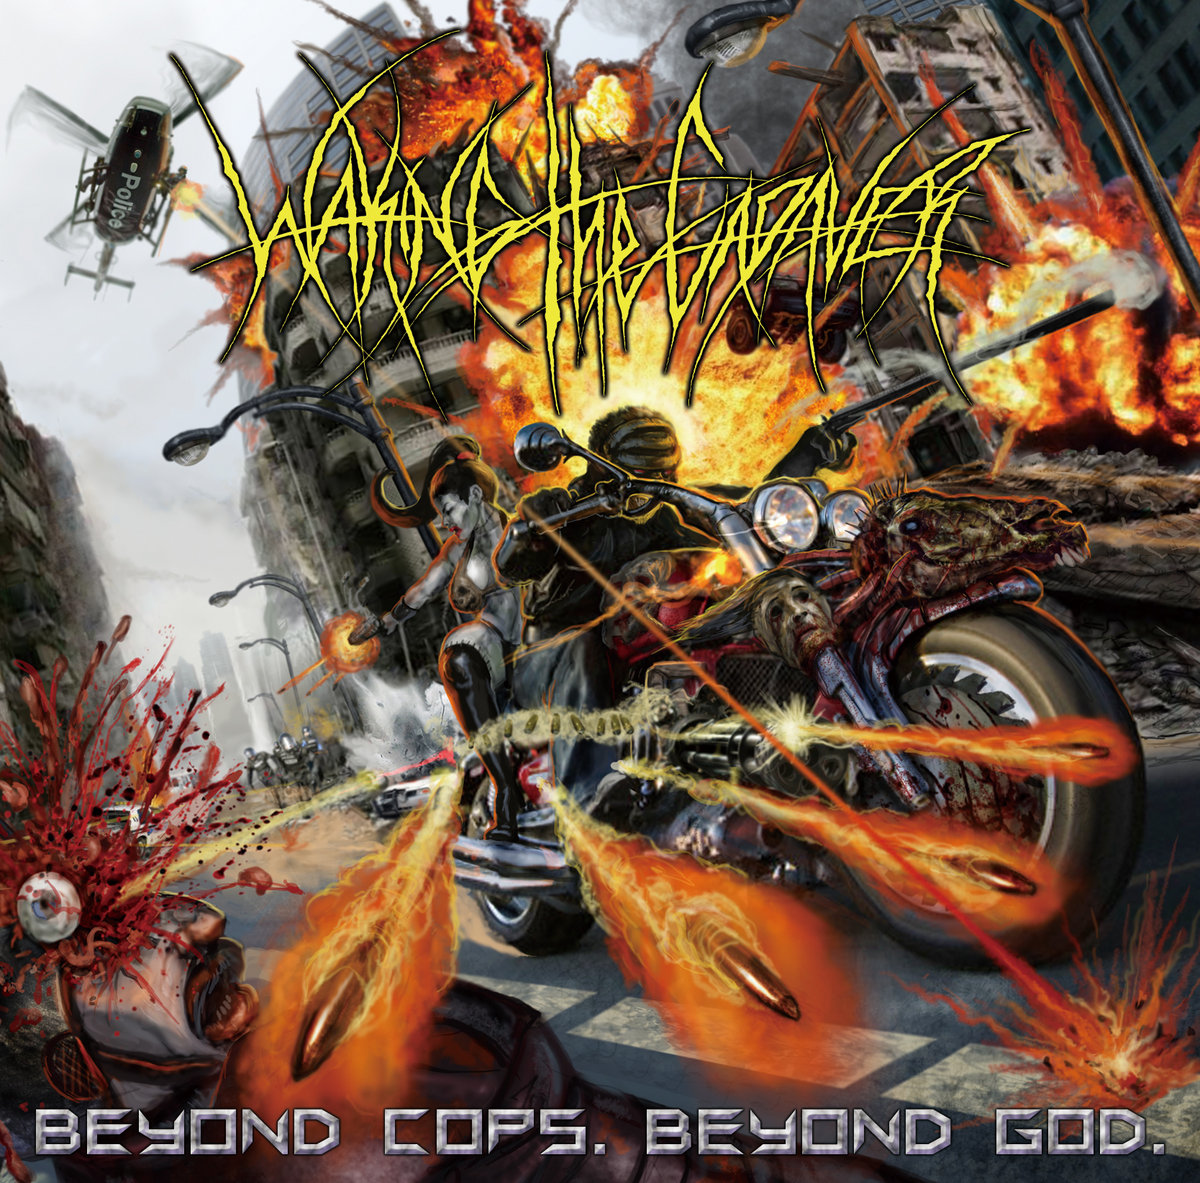 Waking the Cadaver – Beyond Cops